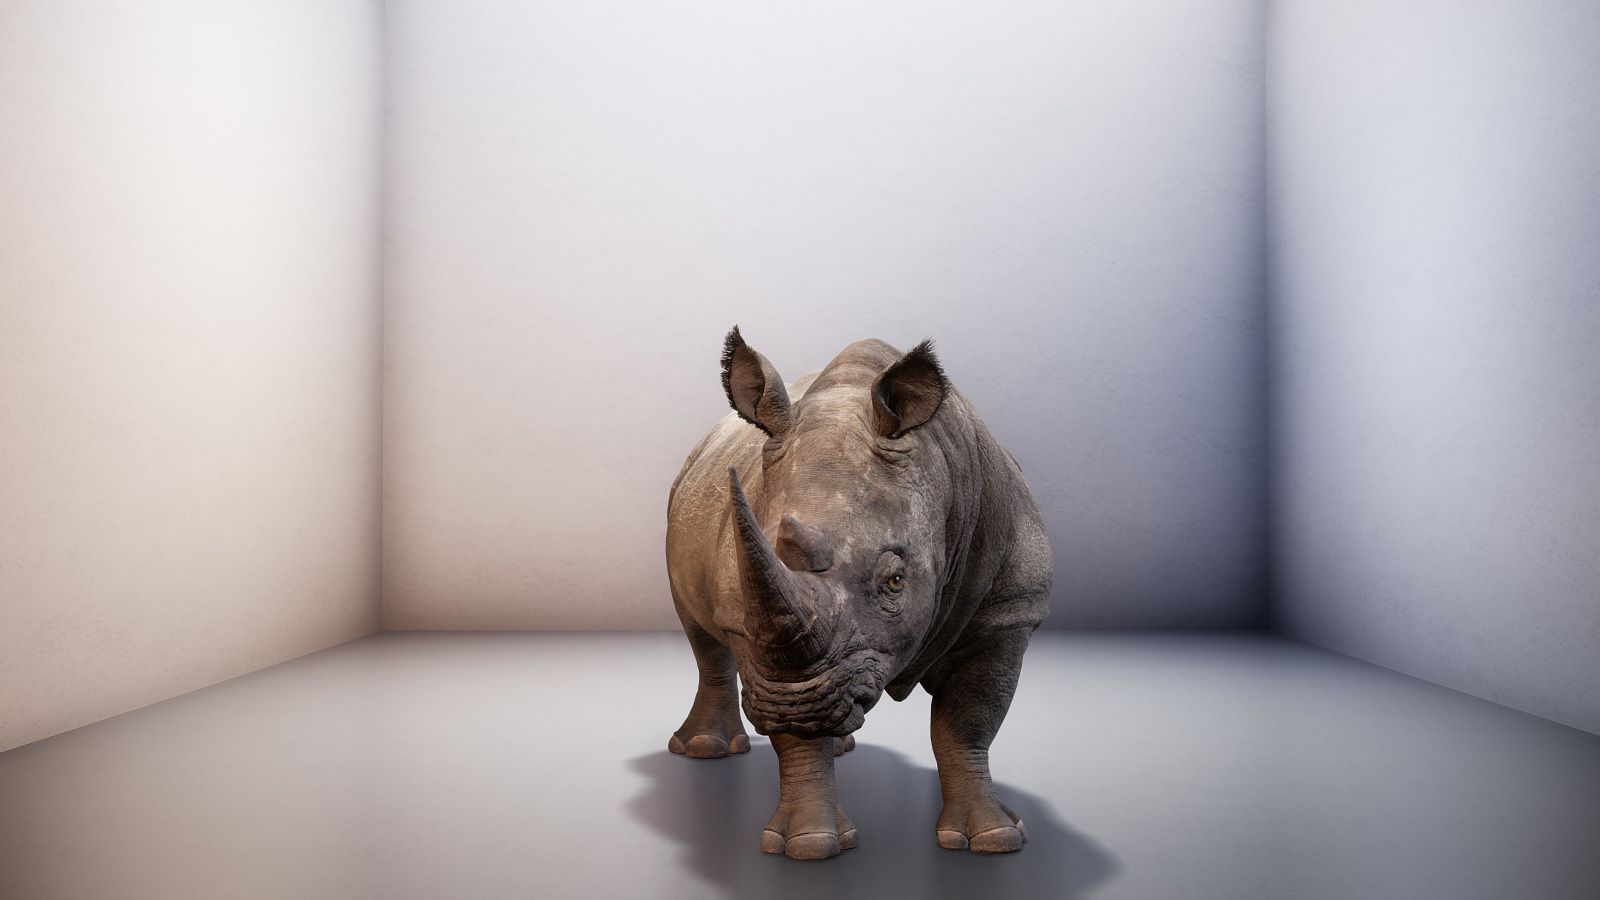 The Northern White Rhino Went Extinct, but for Two Minutes at a